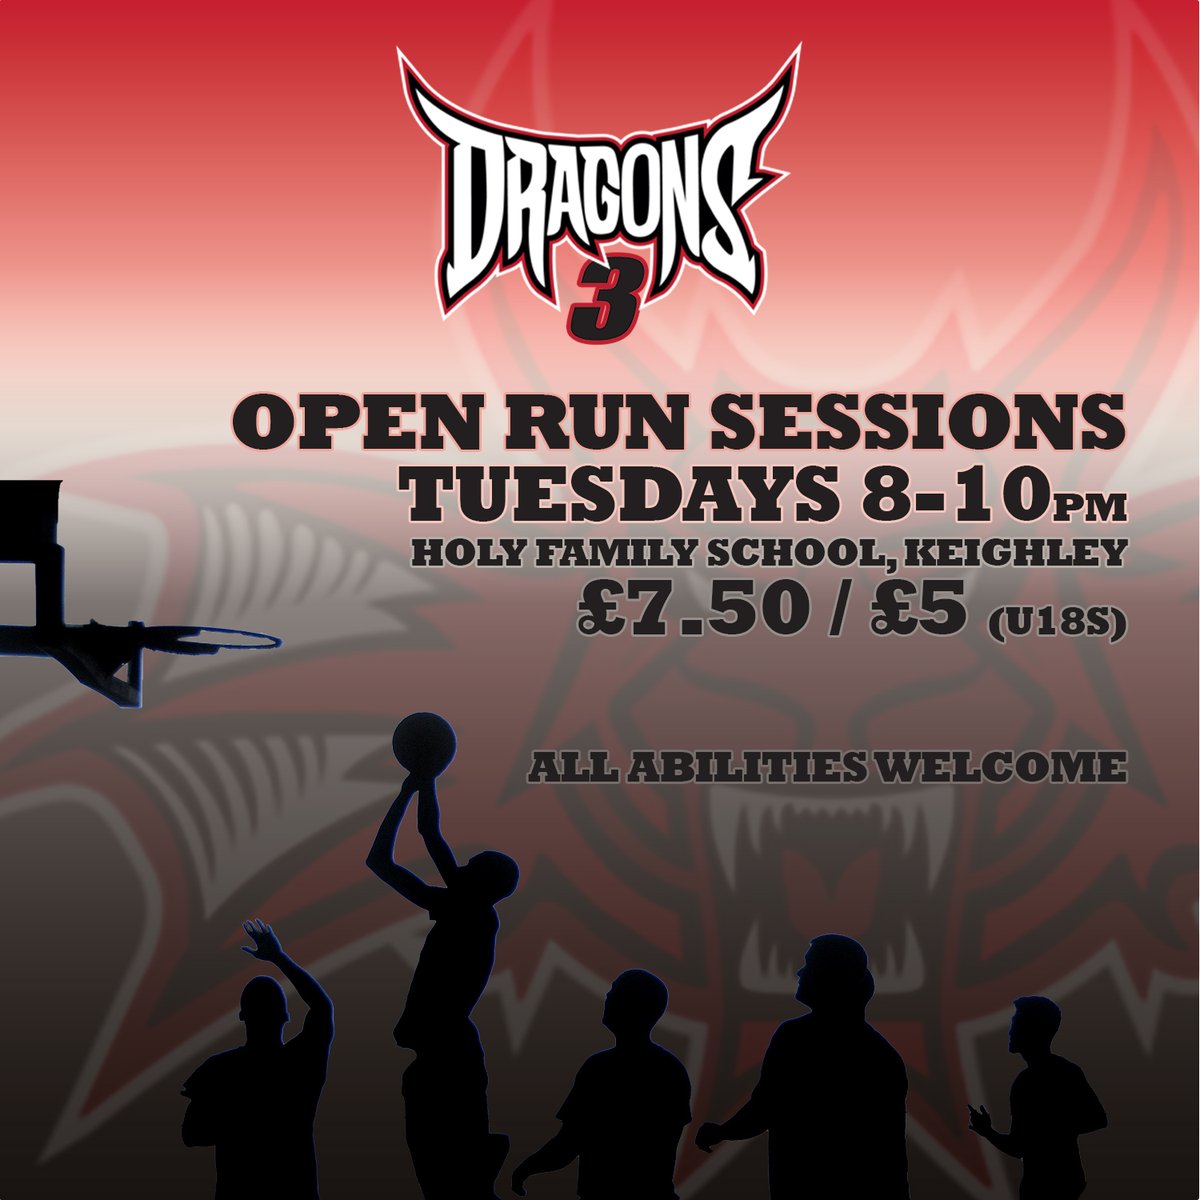 Dragons 3 Open Run Sessions at Holy Family School in Keighley. All Welcome. #BradfordDragons3 #OneClubOneFamily #Basketball #SportForAll